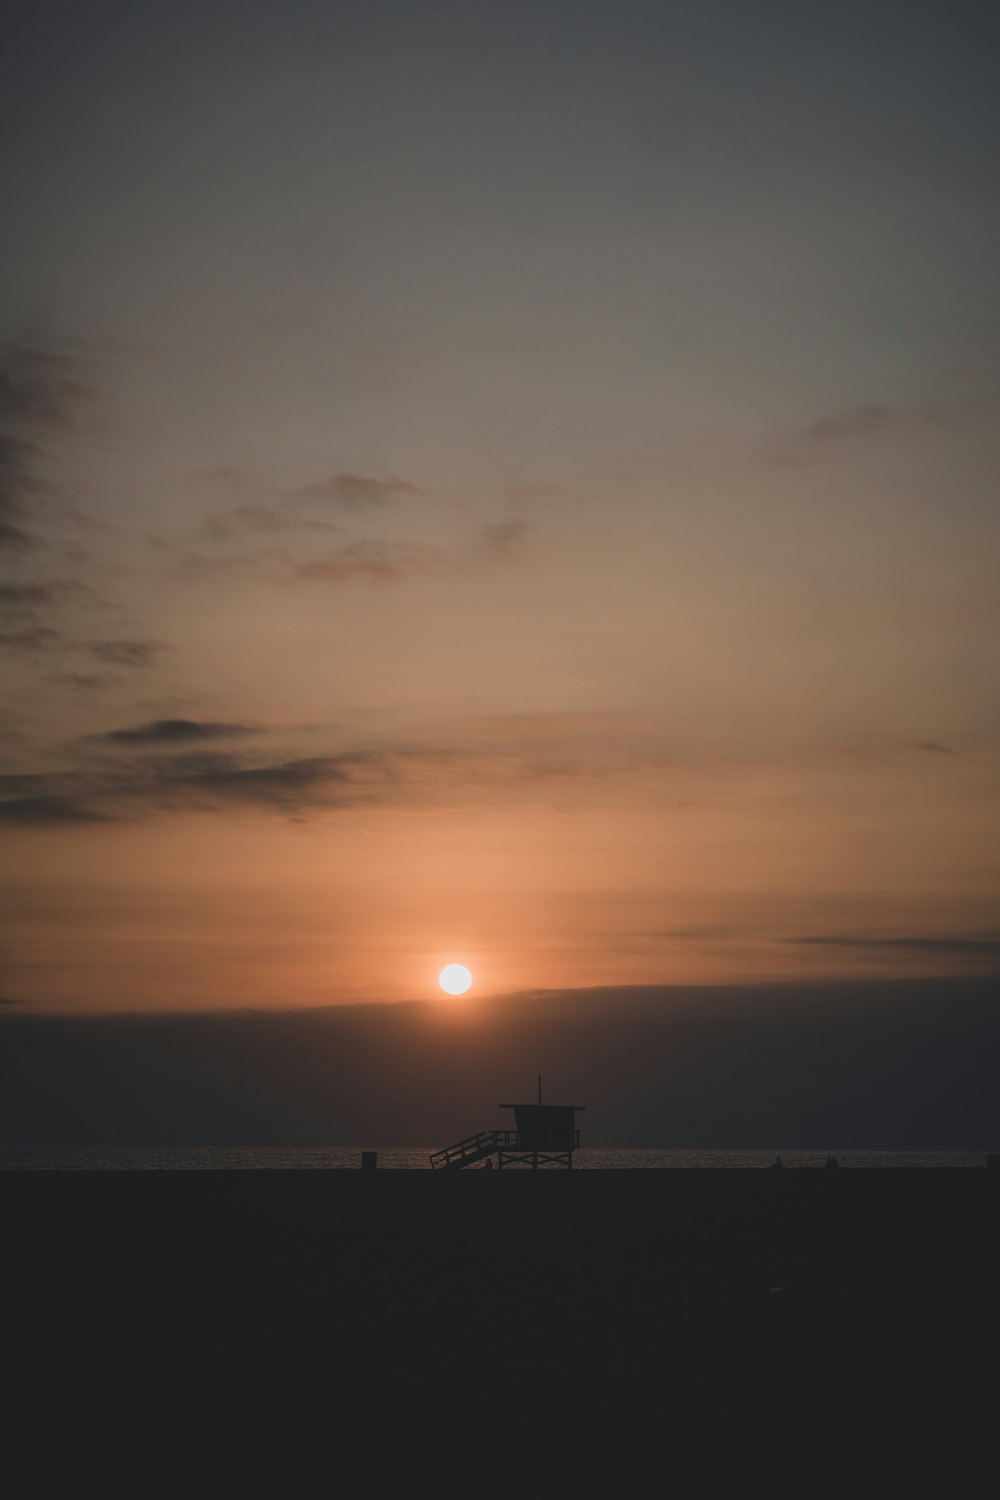 the sun is setting over the ocean with a bench in the foreground